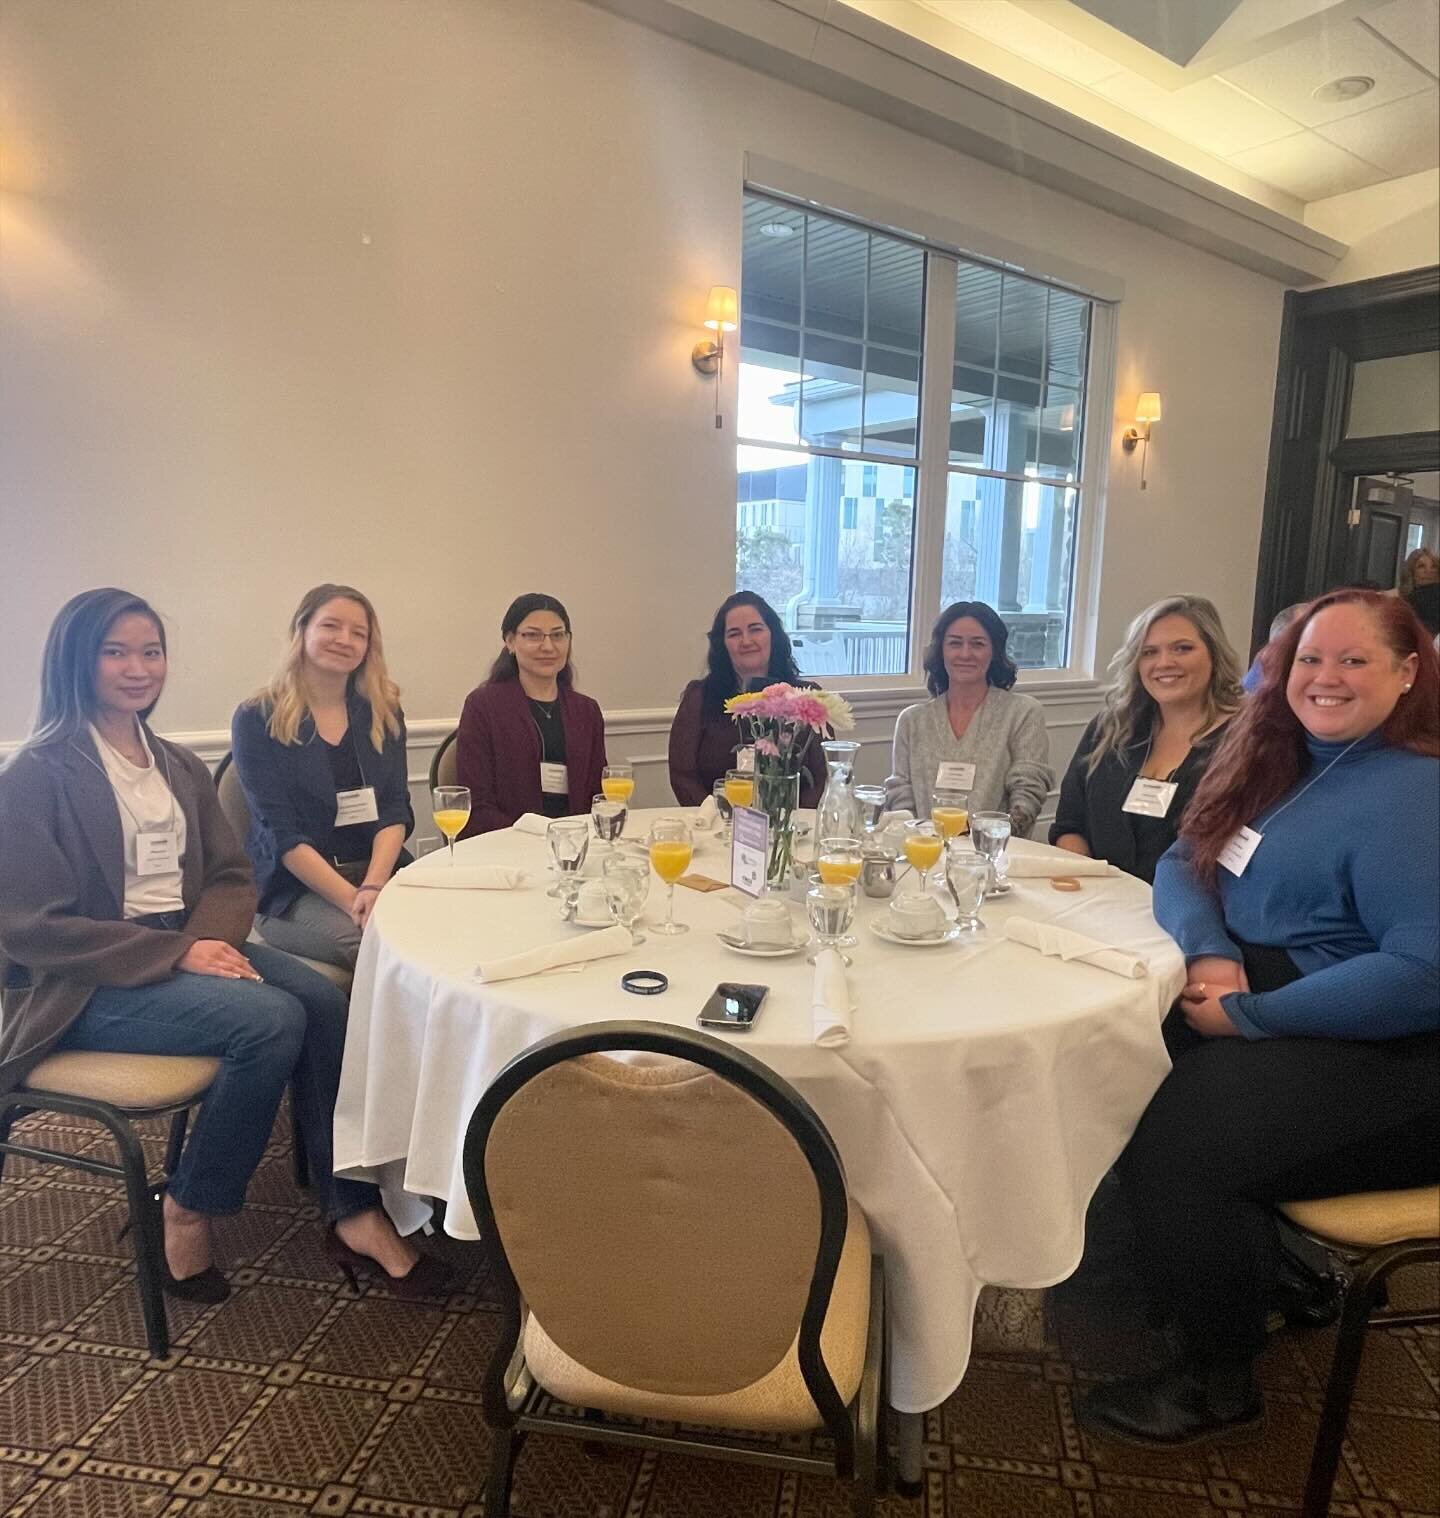 #happyinternationalwomensday from some of our #amazing women at Jackman! Today they attended a seminar run by the @cambridge_chamber on Equity and Inclusivity! 
-
&ldquo;We are all proud to be members of this community and part of the Construction in